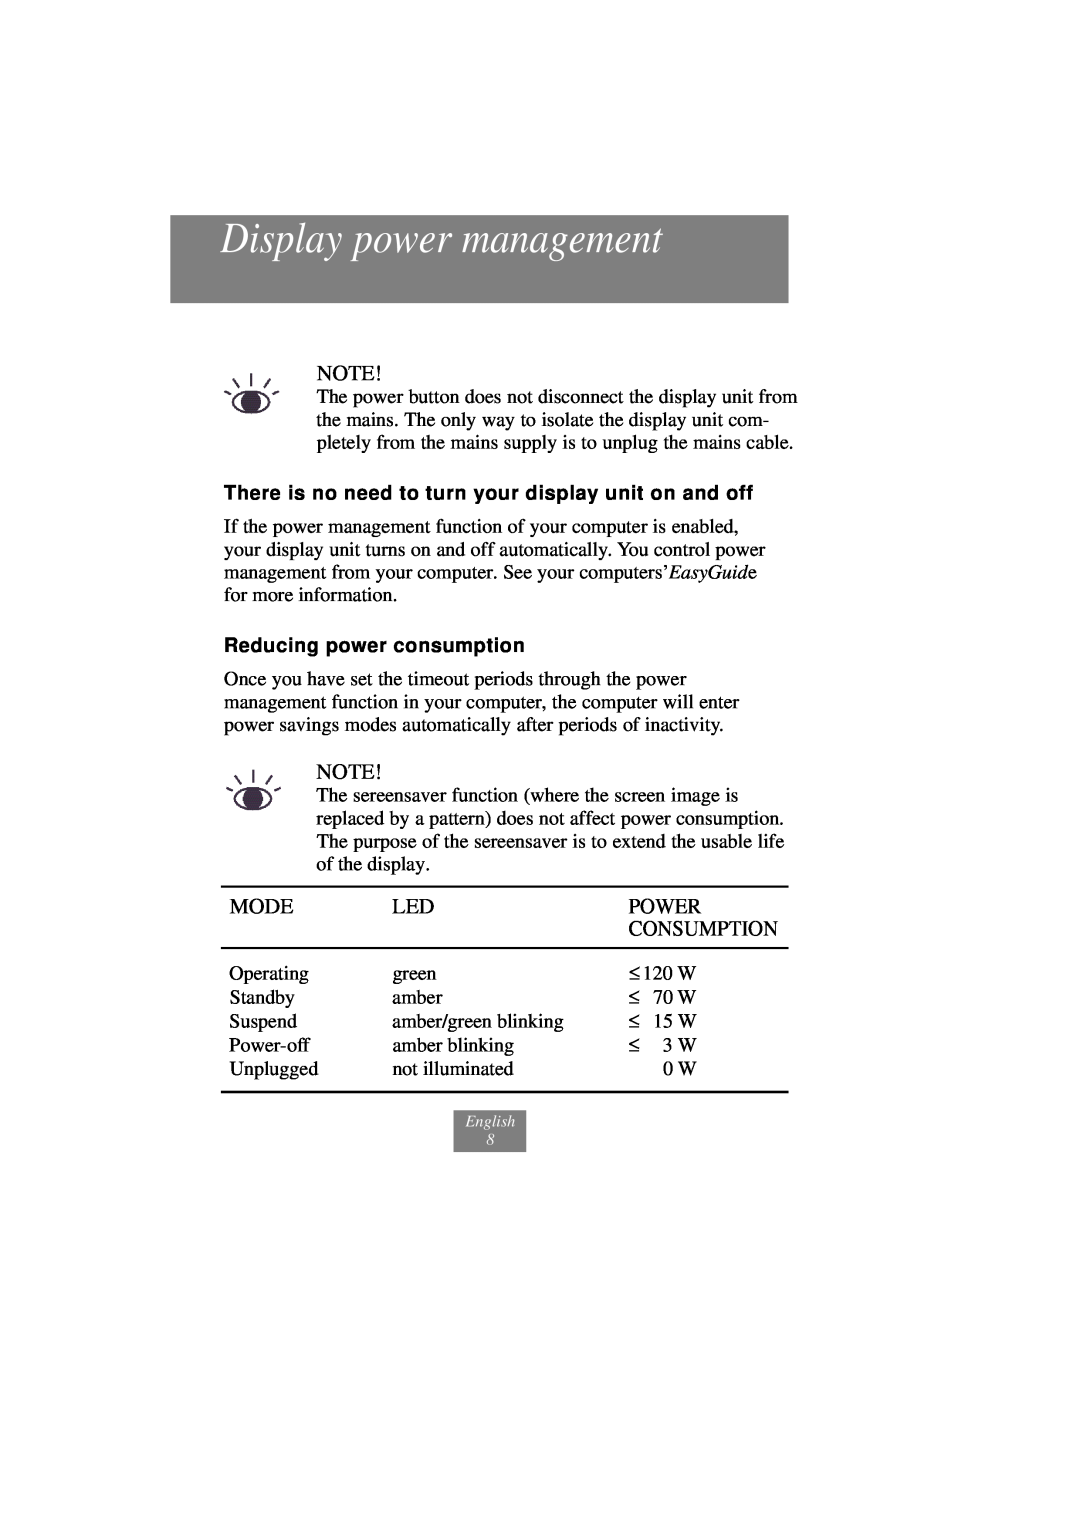 Fujitsu x178 Display power management, There is no need to turn your display unit on and off, Reducing power consumption 